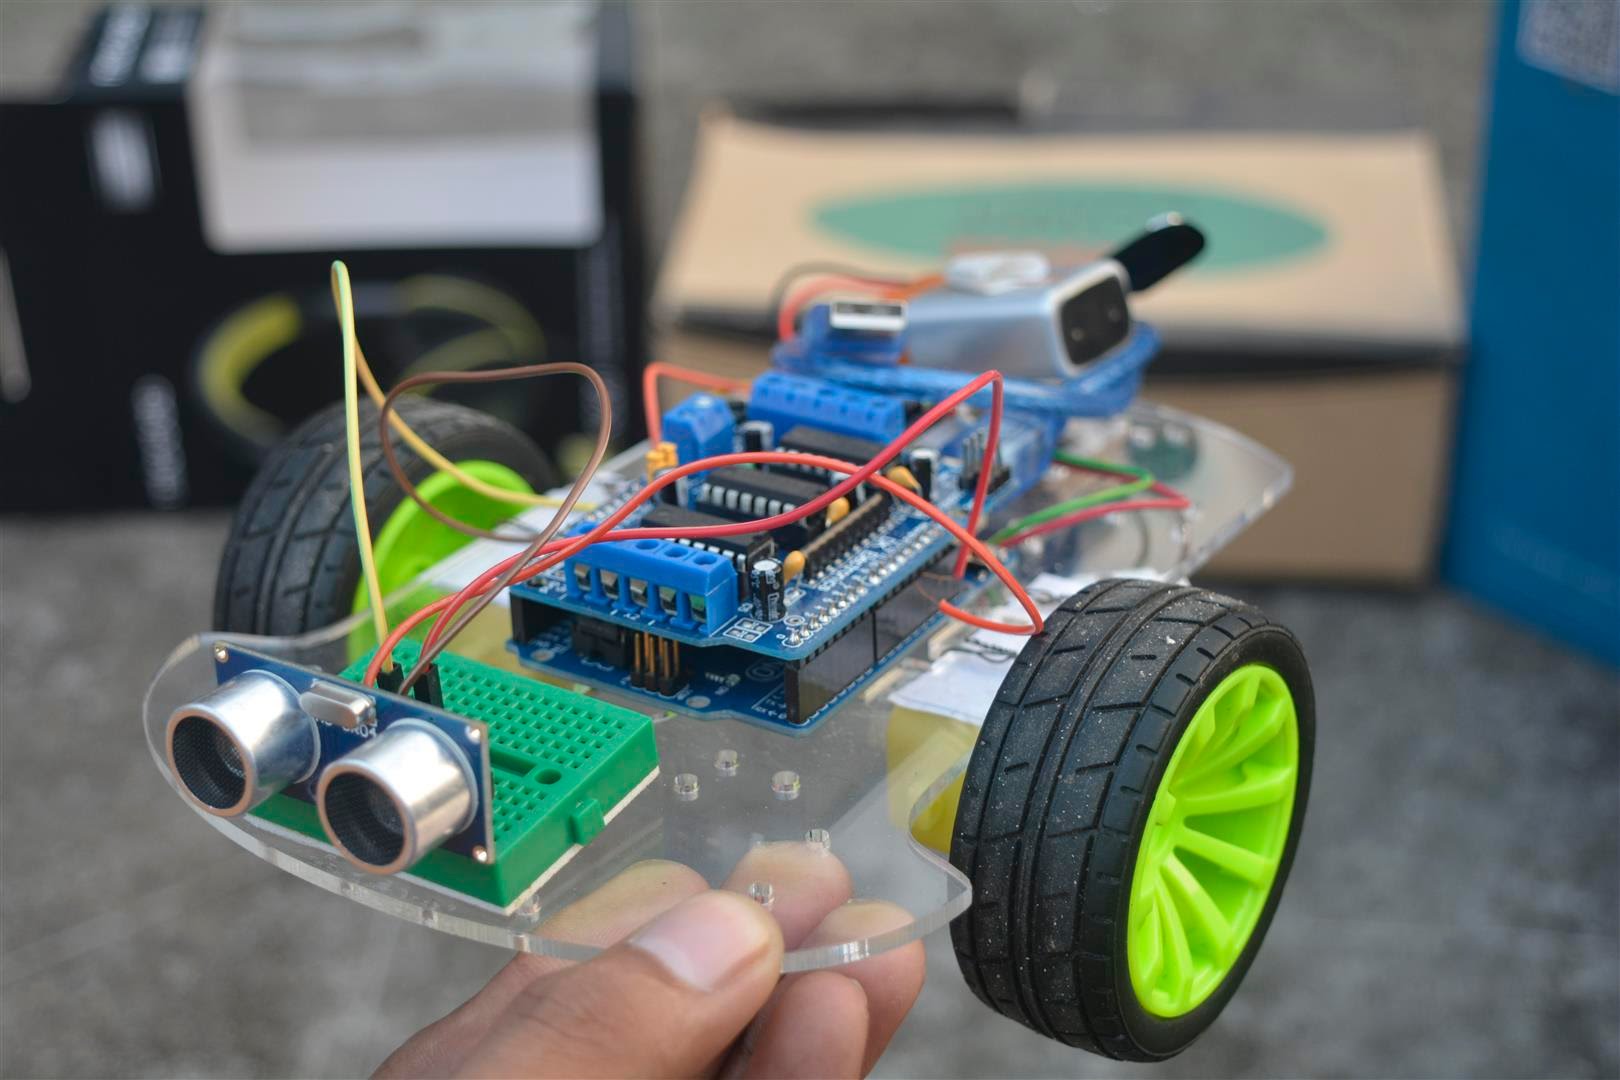 How to build a simple robot with Arduino and 3D printer - Personal Robots